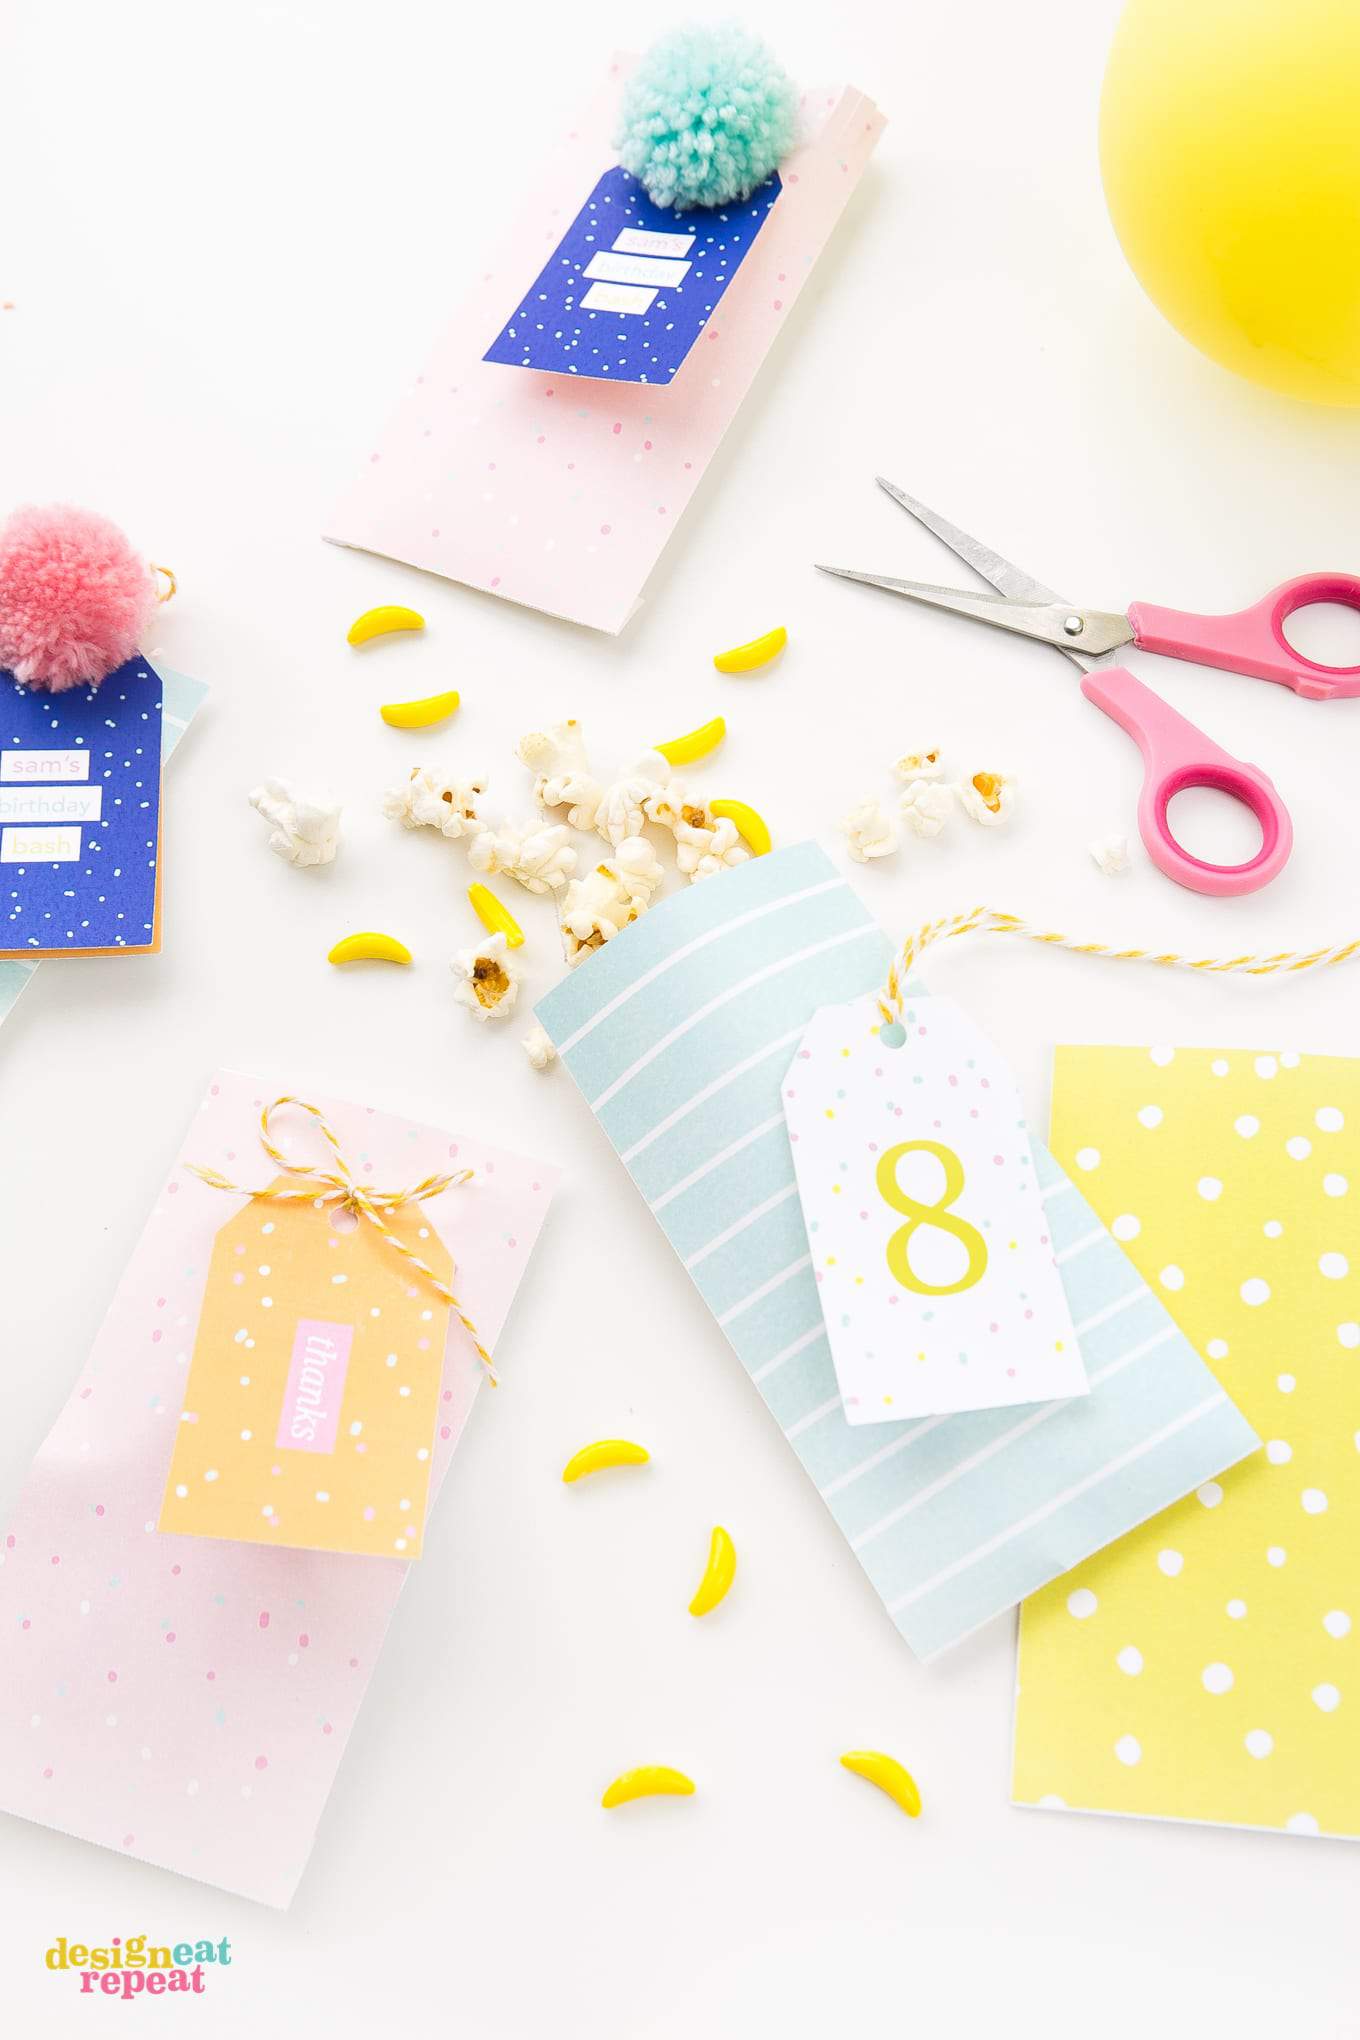 Pink, peach, blue, and yellow party favor bags with matching printable gift tags.